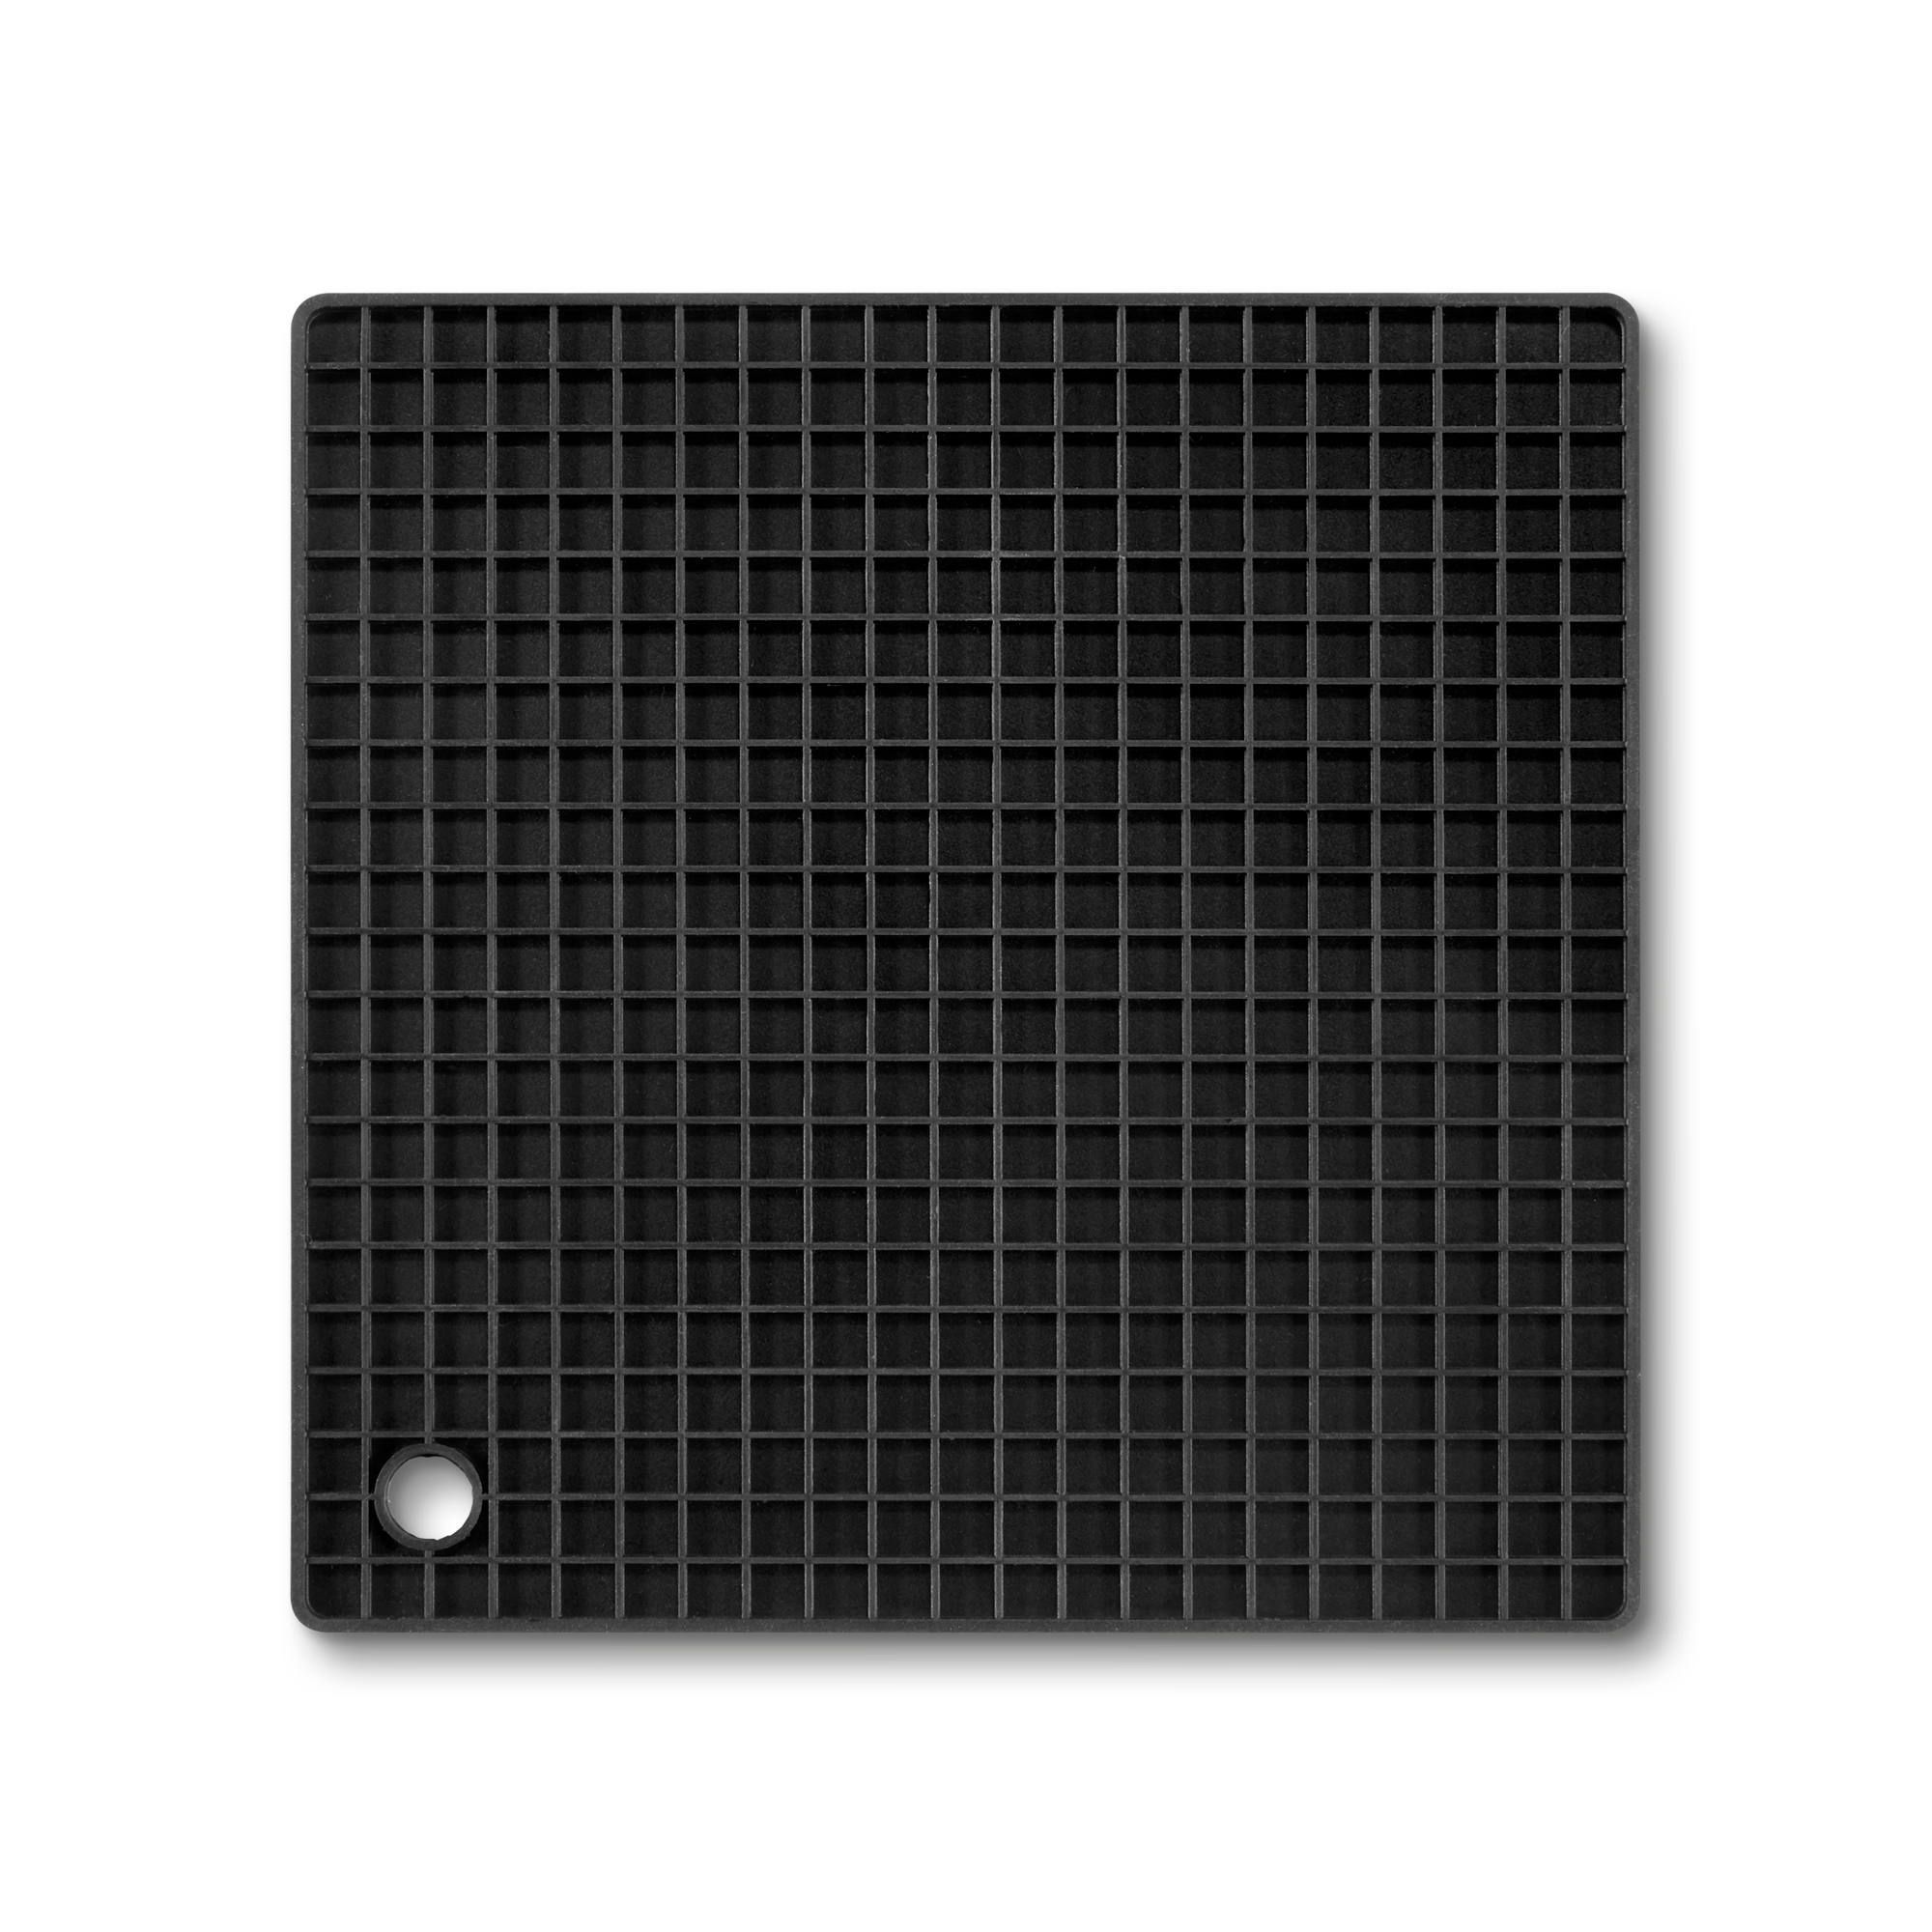 3/4 view, black silicone trivet showing grid pattern and hanging hole.